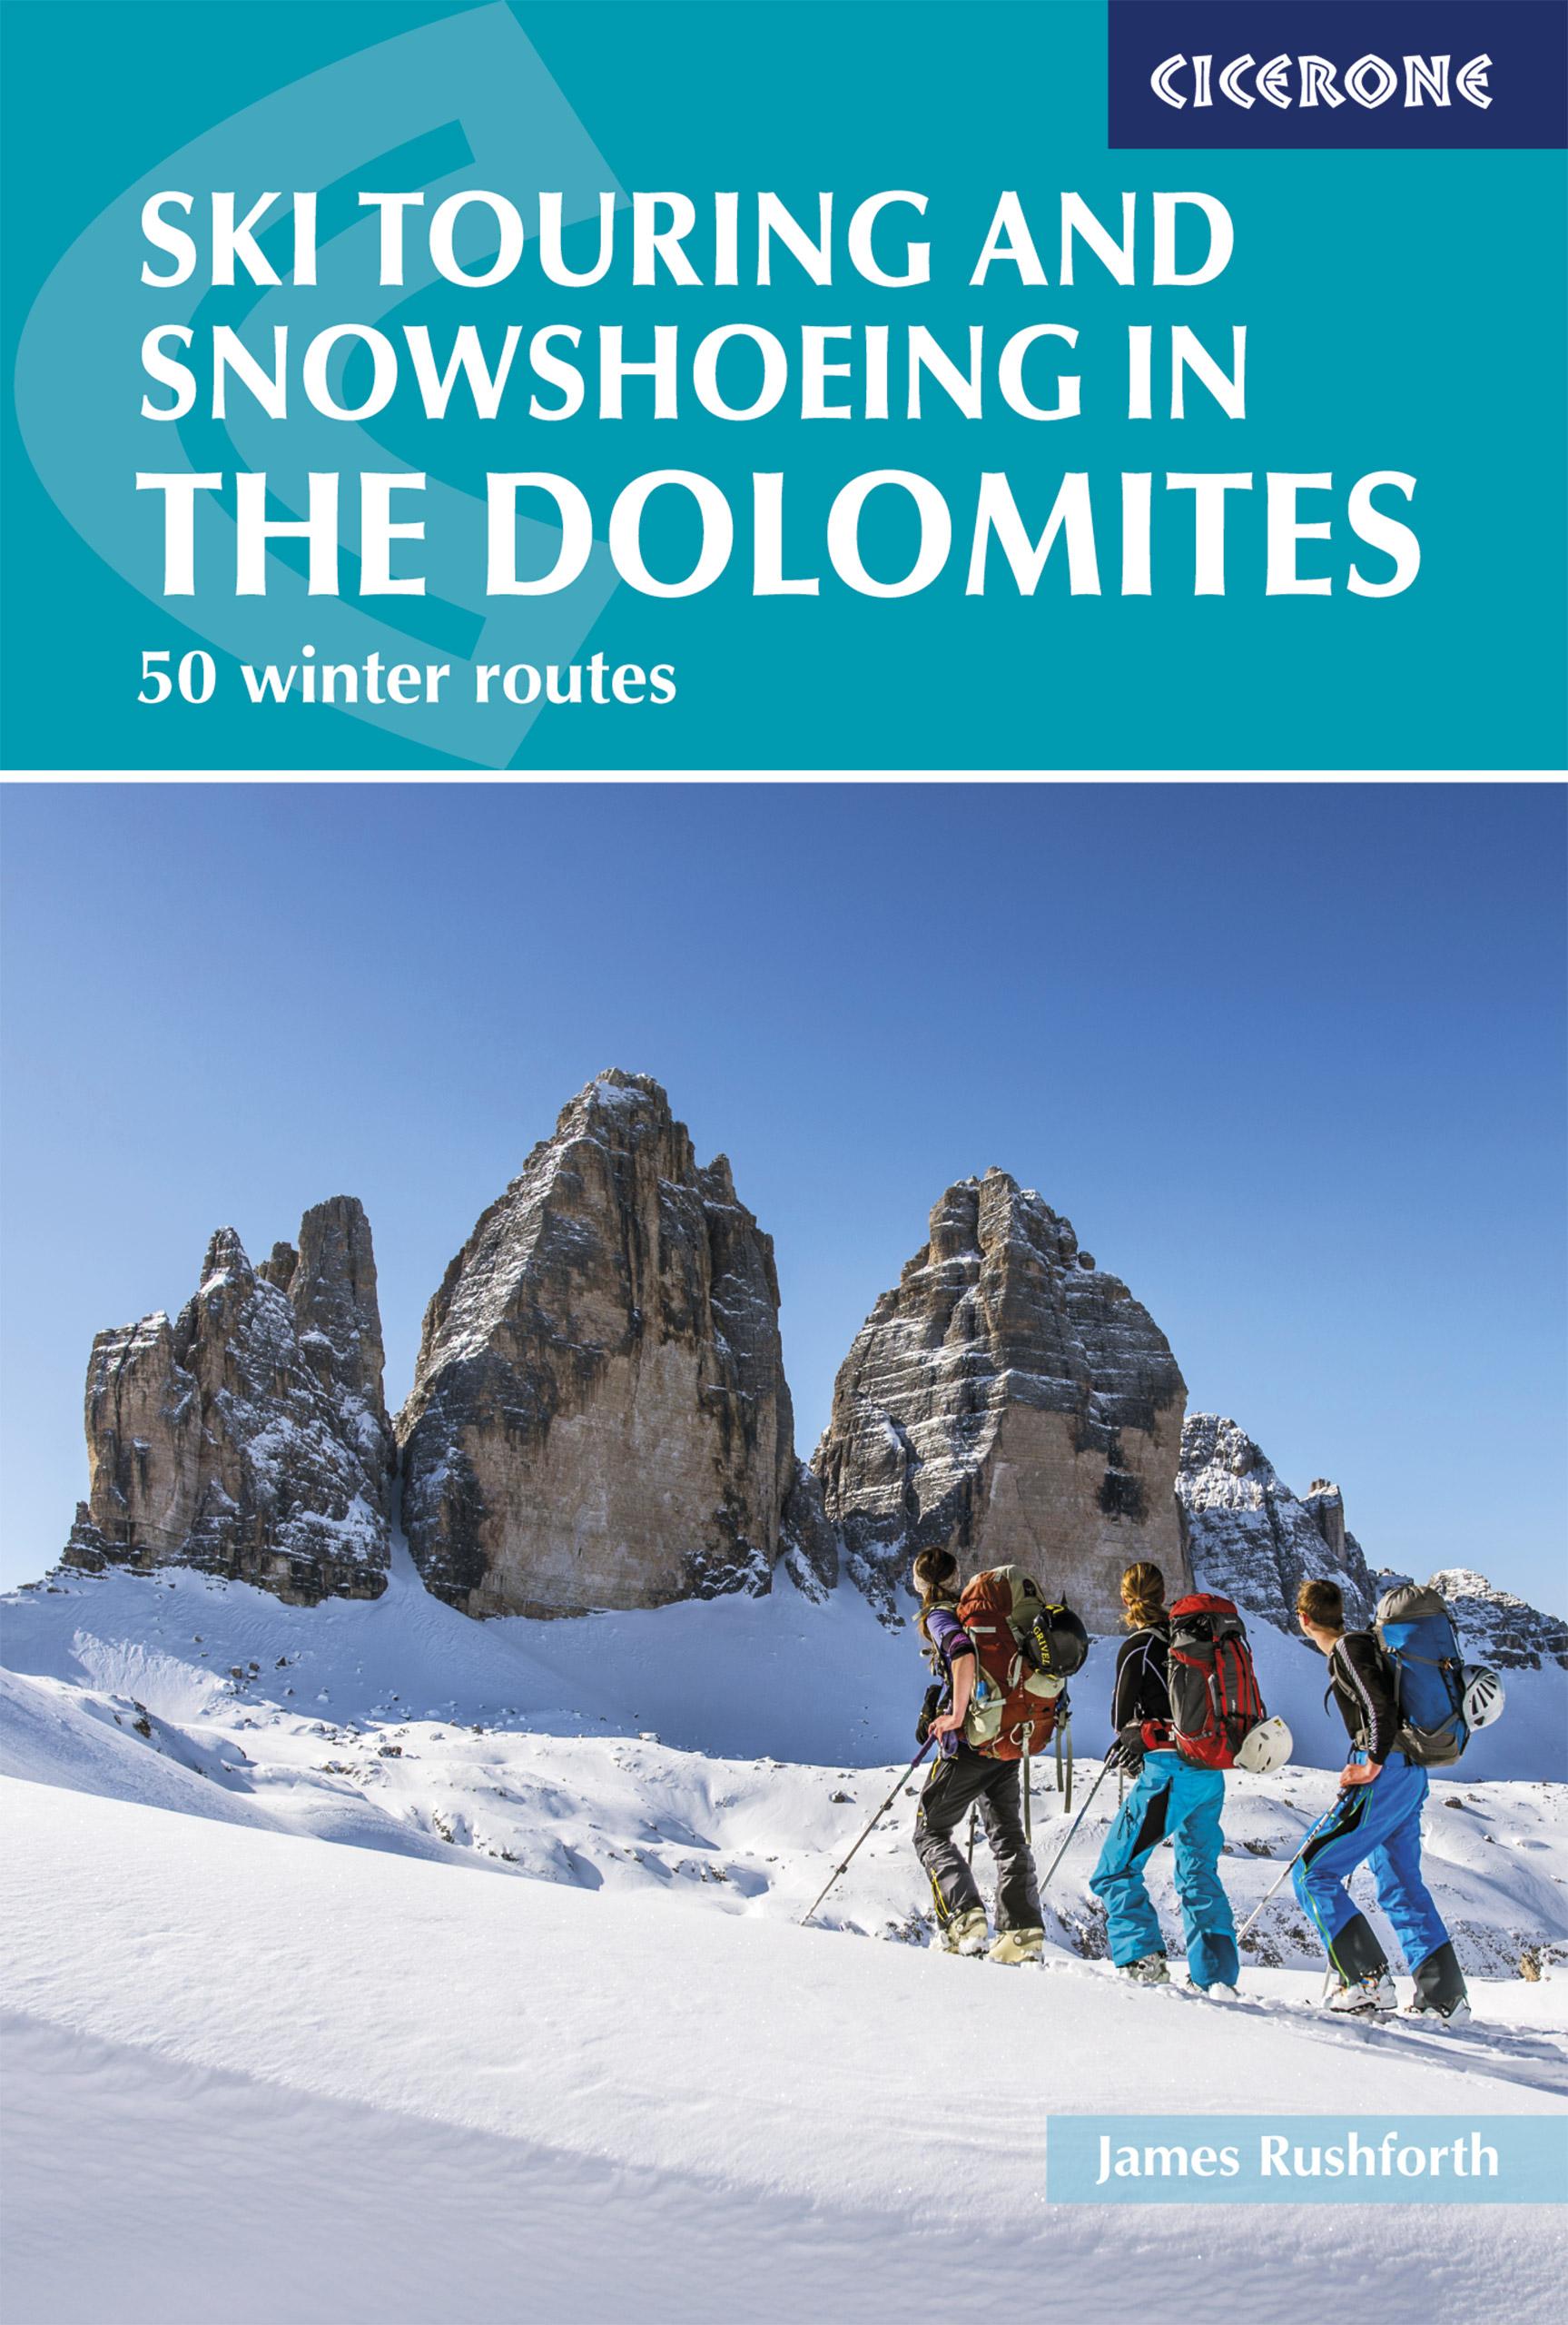 Ski Touring and Snowshoeing in the Dolomites - James Rushforth